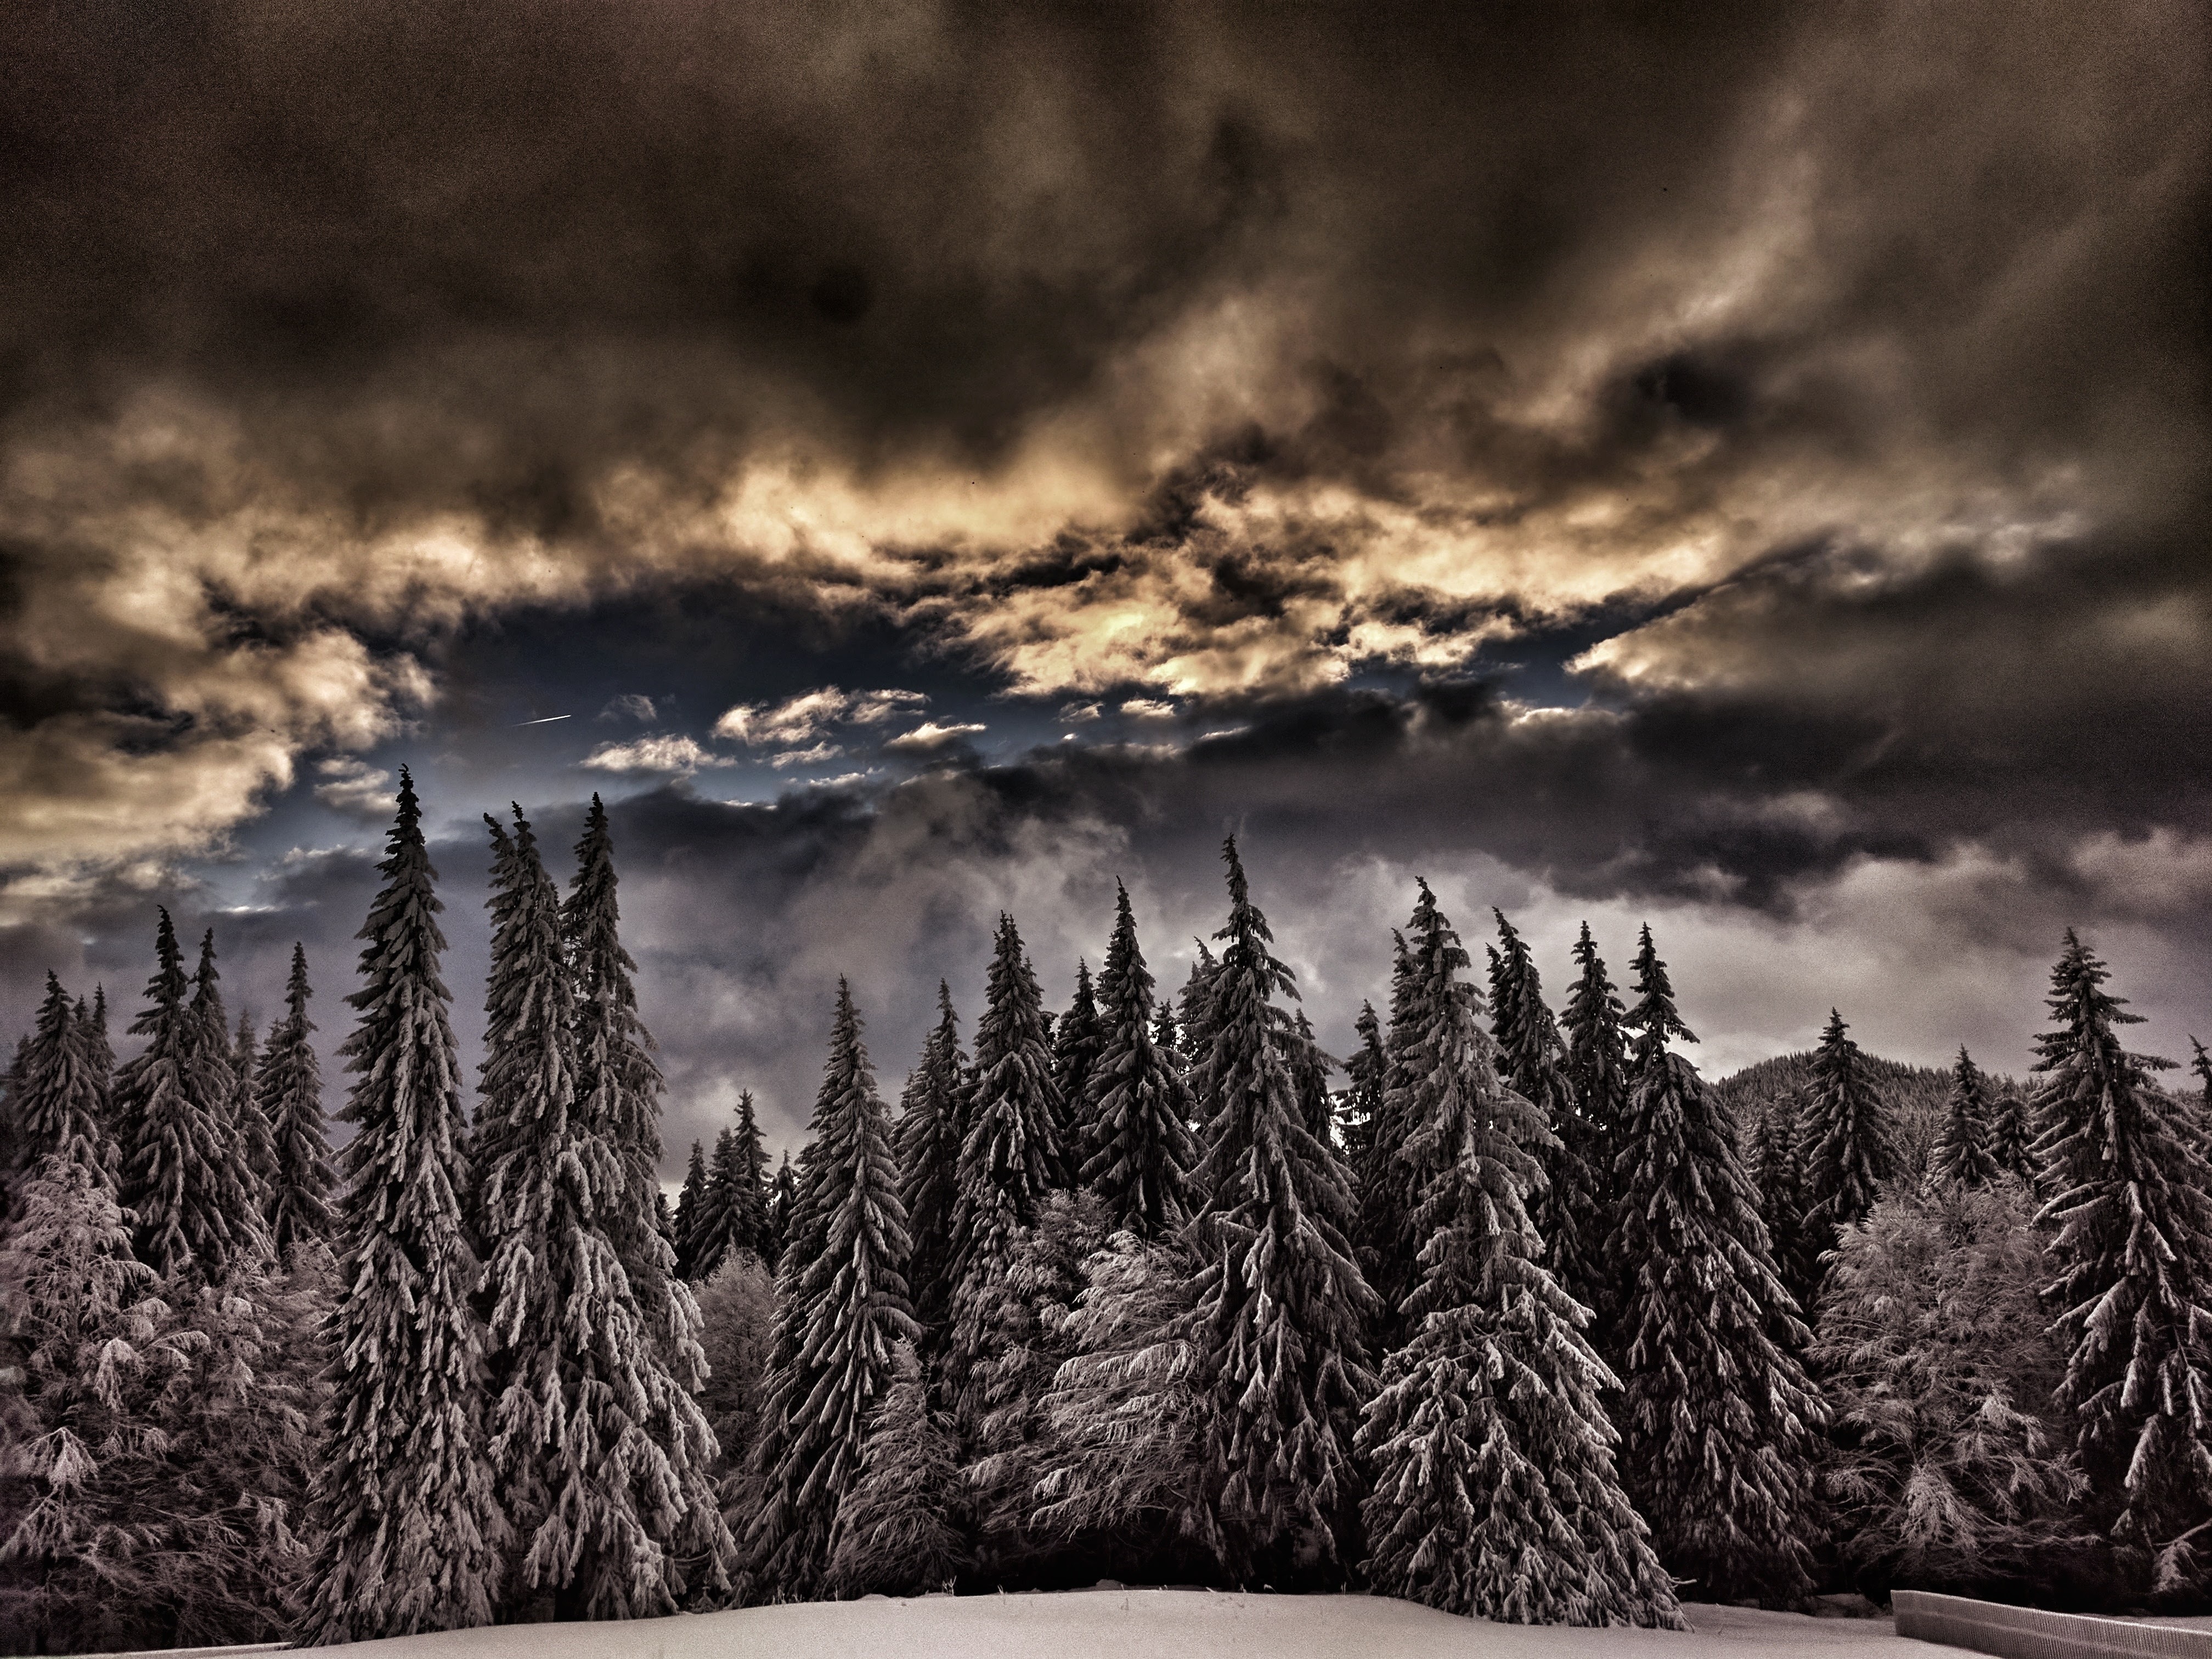 snow covered pine trees under gray cloudy sky during daytime